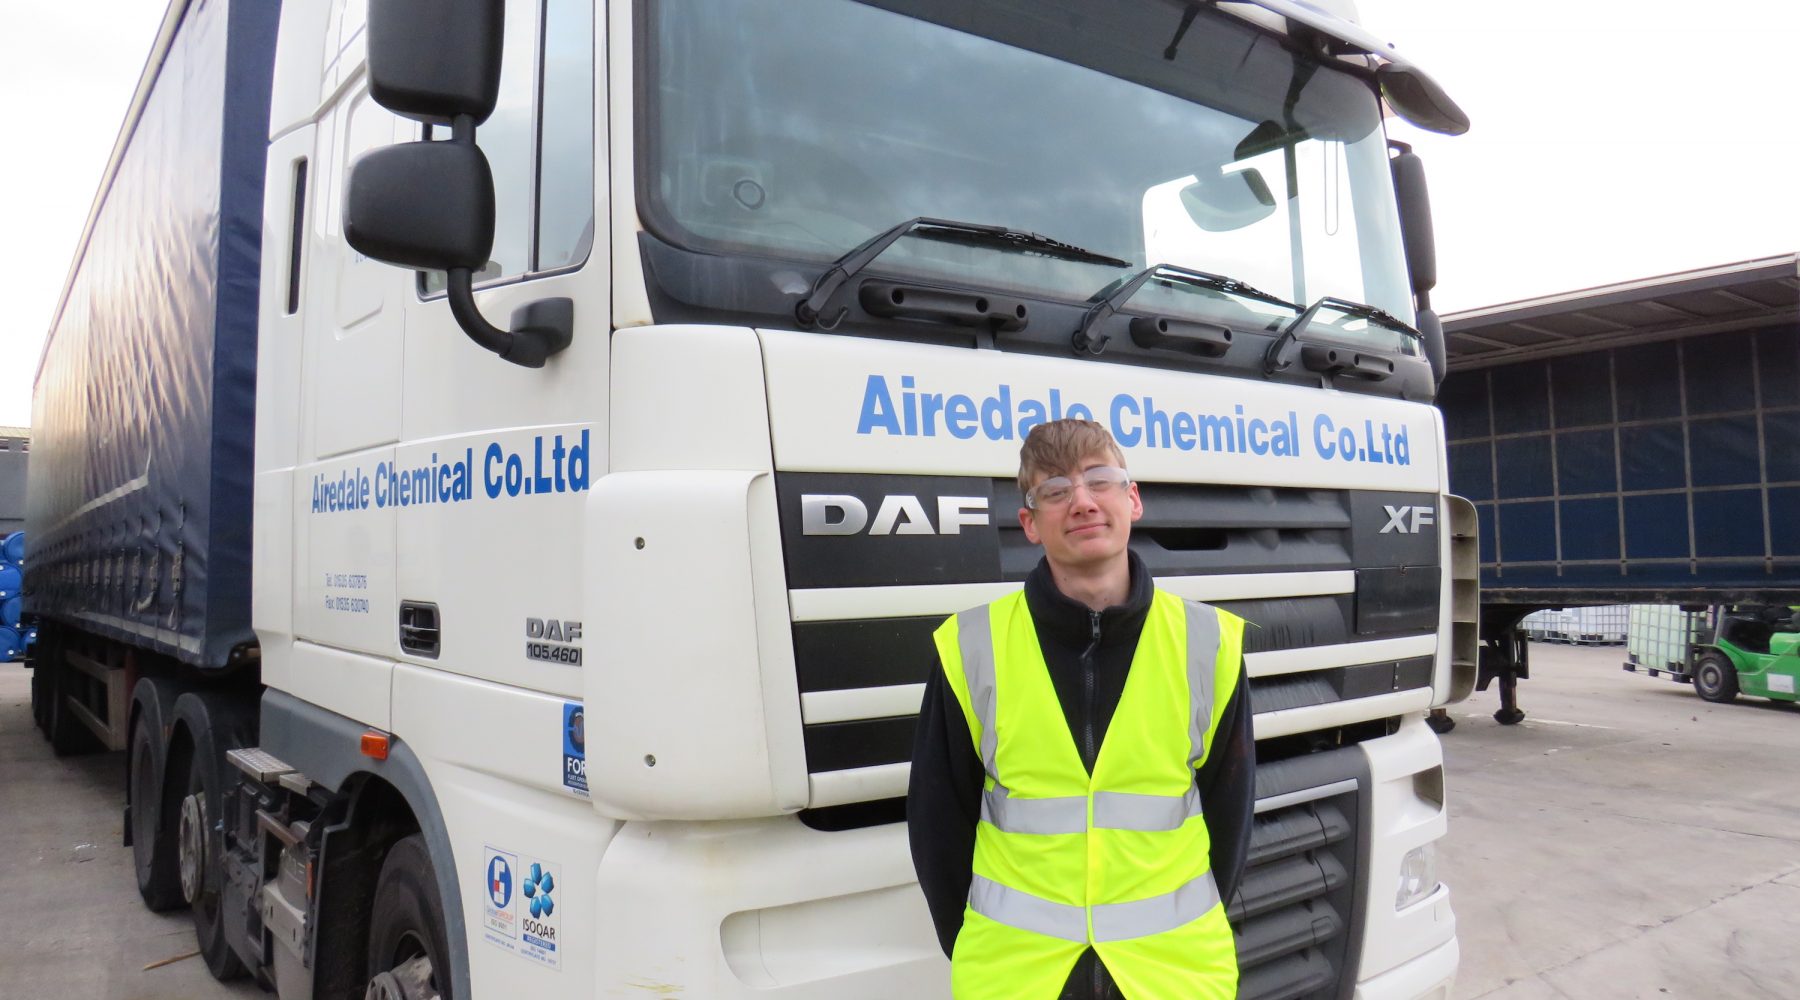 ENGINEERING APPRENTICE STARTS CAREER AT CHEMICAL COMPANY